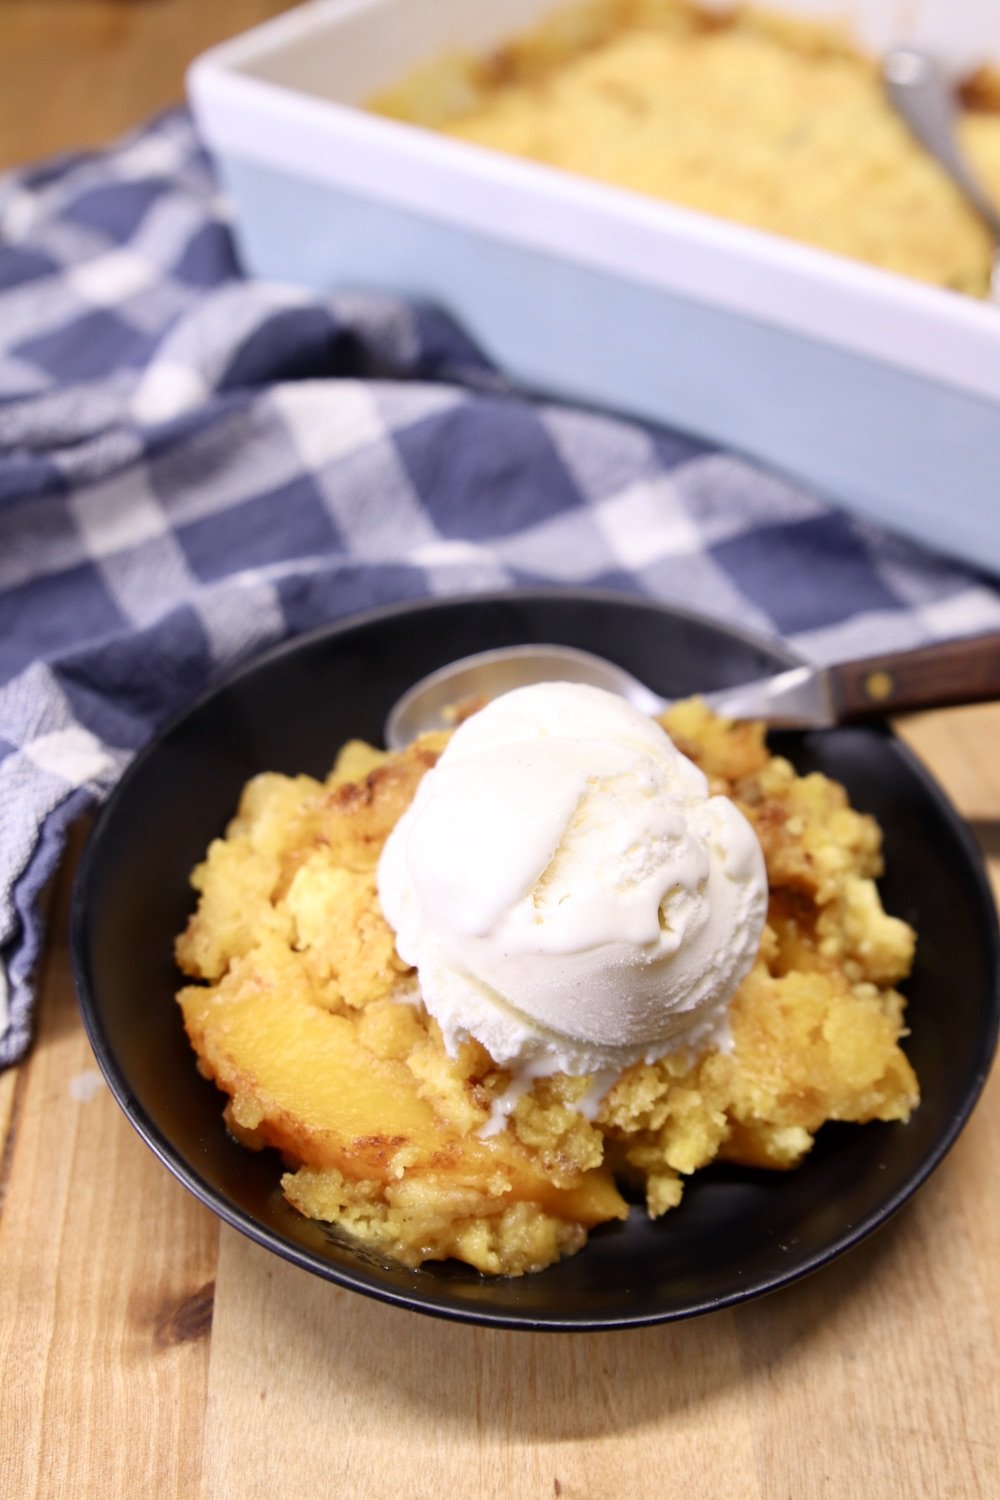 Peach Dump Cake with vanilla ice cream in a black bowl, cake pan in background